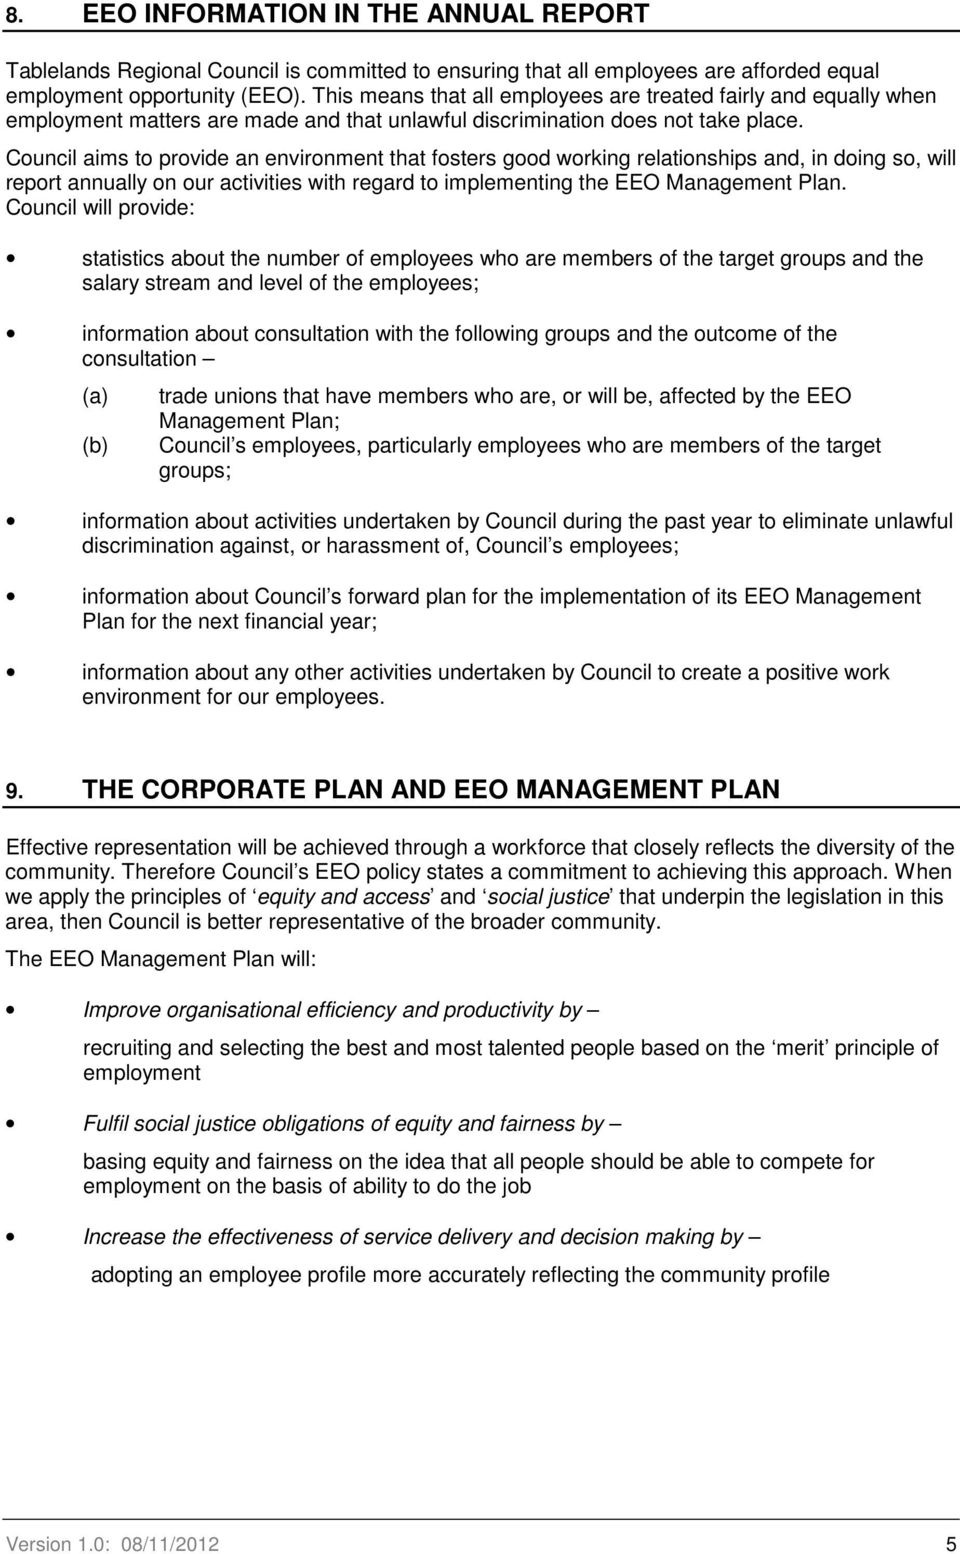 Council aims to provide an environment that fosters good working relationships and, in doing so, will report annually on our activities with regard to implementing the EEO Management Plan.